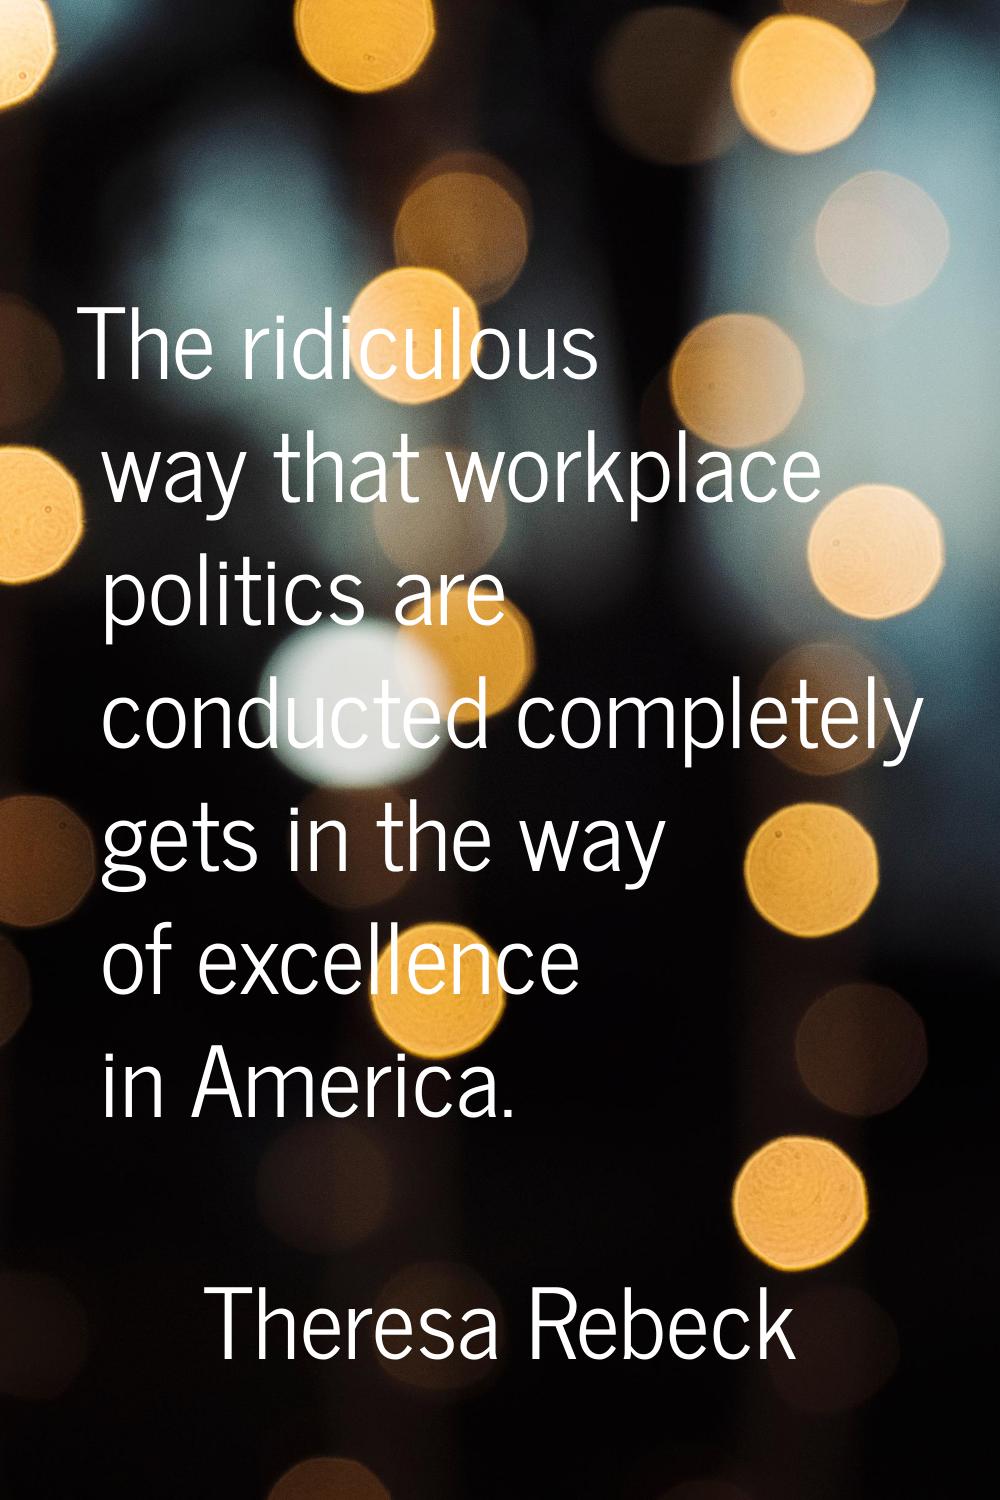 The ridiculous way that workplace politics are conducted completely gets in the way of excellence i